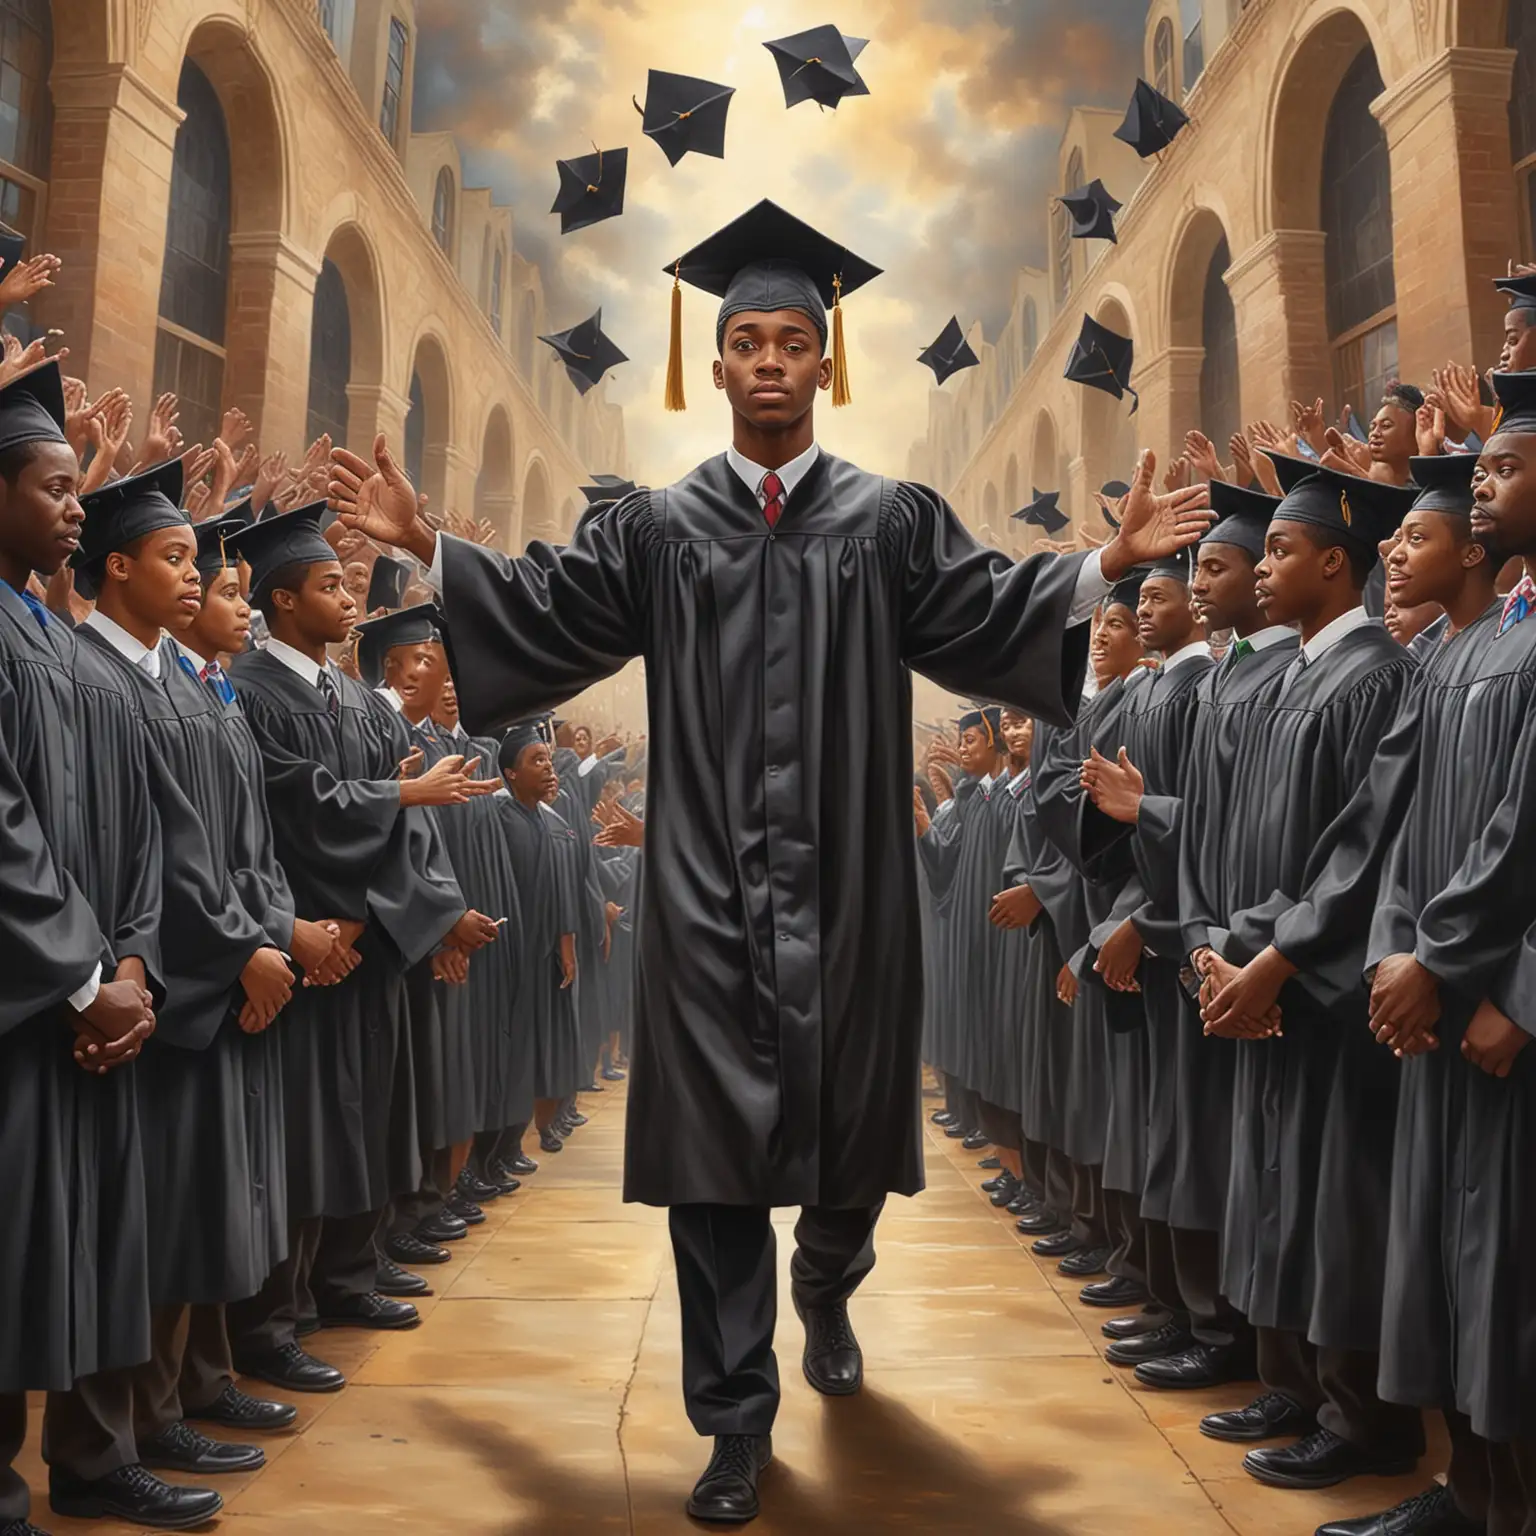 create a surreal painting of "A young African American man  in graduation cap & gown standing in the center of the picture, coming in from the sides, top and bottom of the picture place the arms and hands of the people that helped assist him through his life reaching in to lovingly touch him.